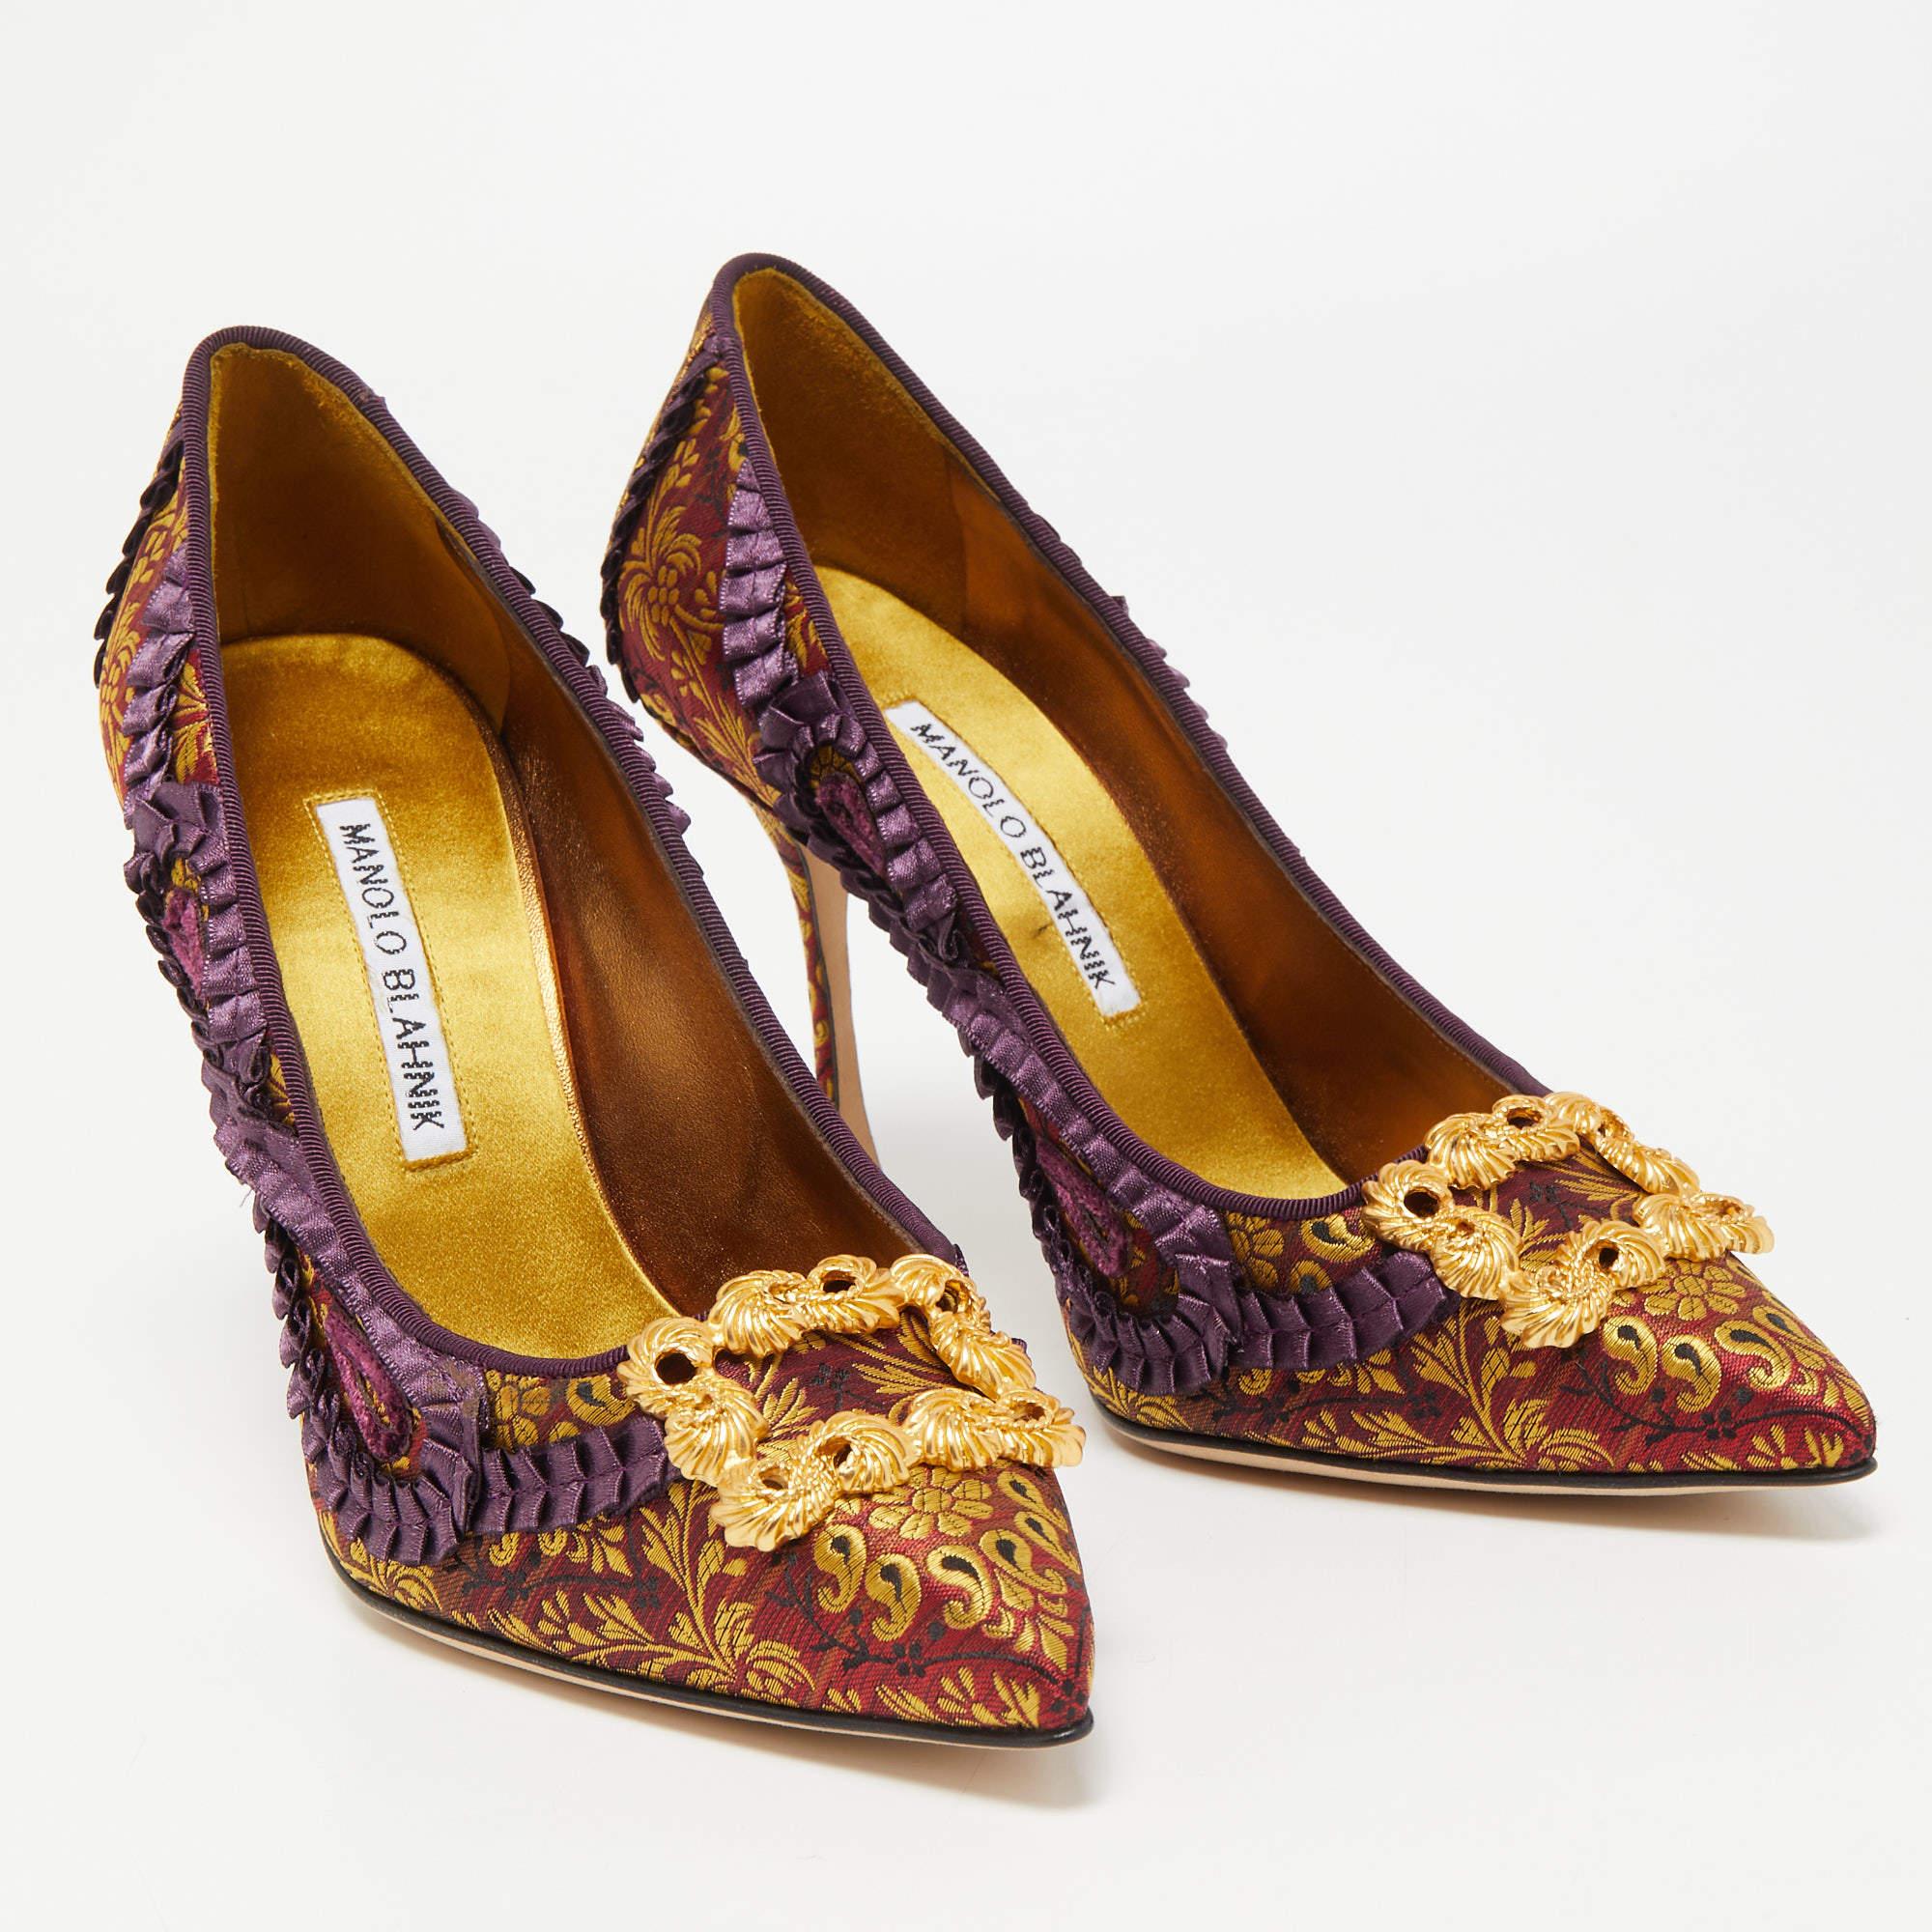 Manolo Blahnik is well-known for his graceful designs, and his label is synonymous with opulence, femininity, and elegance. These Hangisi pumps are crafted from brocade fabric into a pointed-toe silhouette augmented by the embellishments perched on